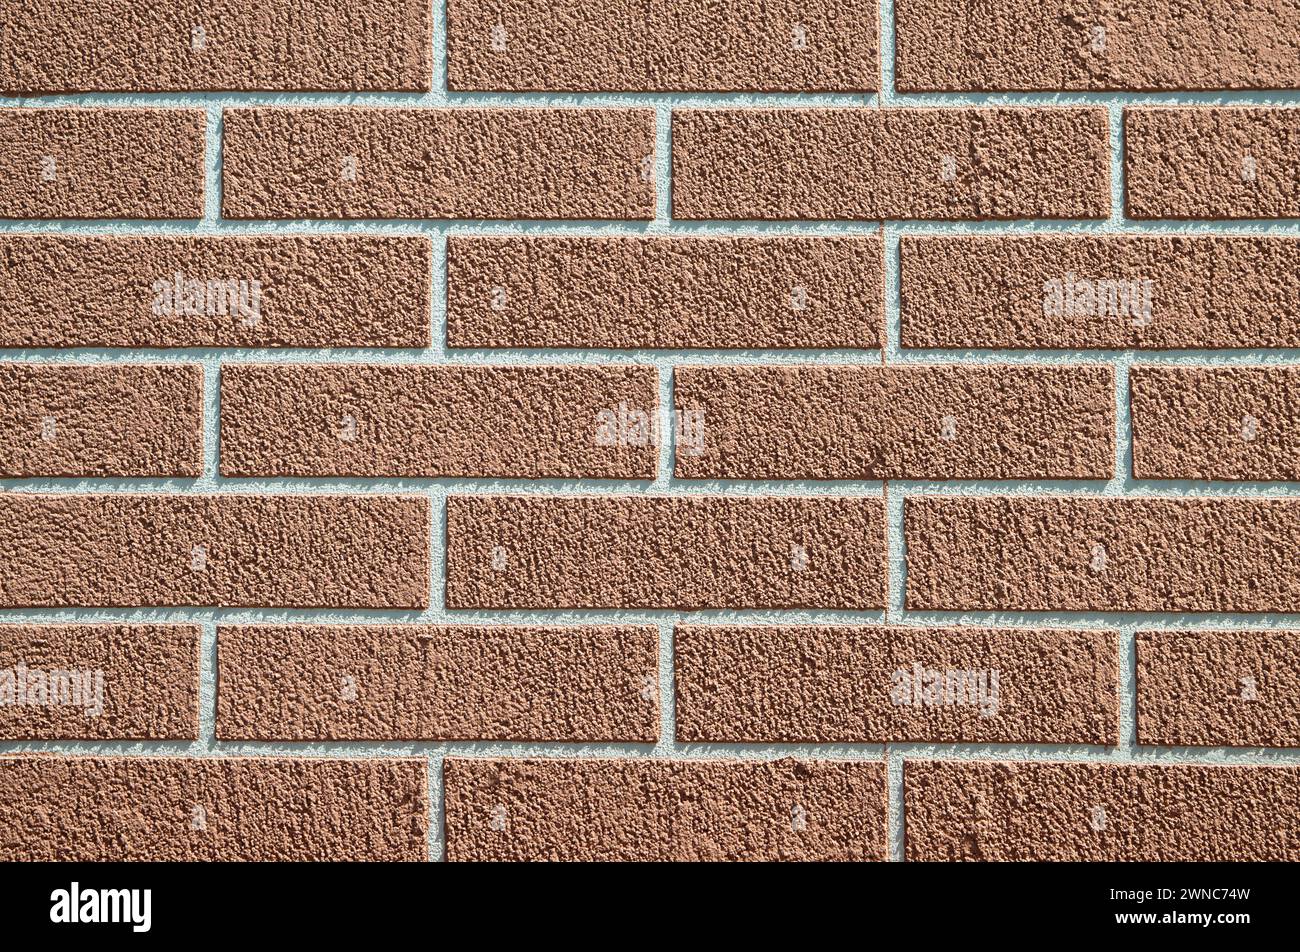 Vintage brick wall background, brickwall texture aging effect. Grunge rrick wall as brickwork background texture. Rustic revival masonry red brick wal Stock Photo